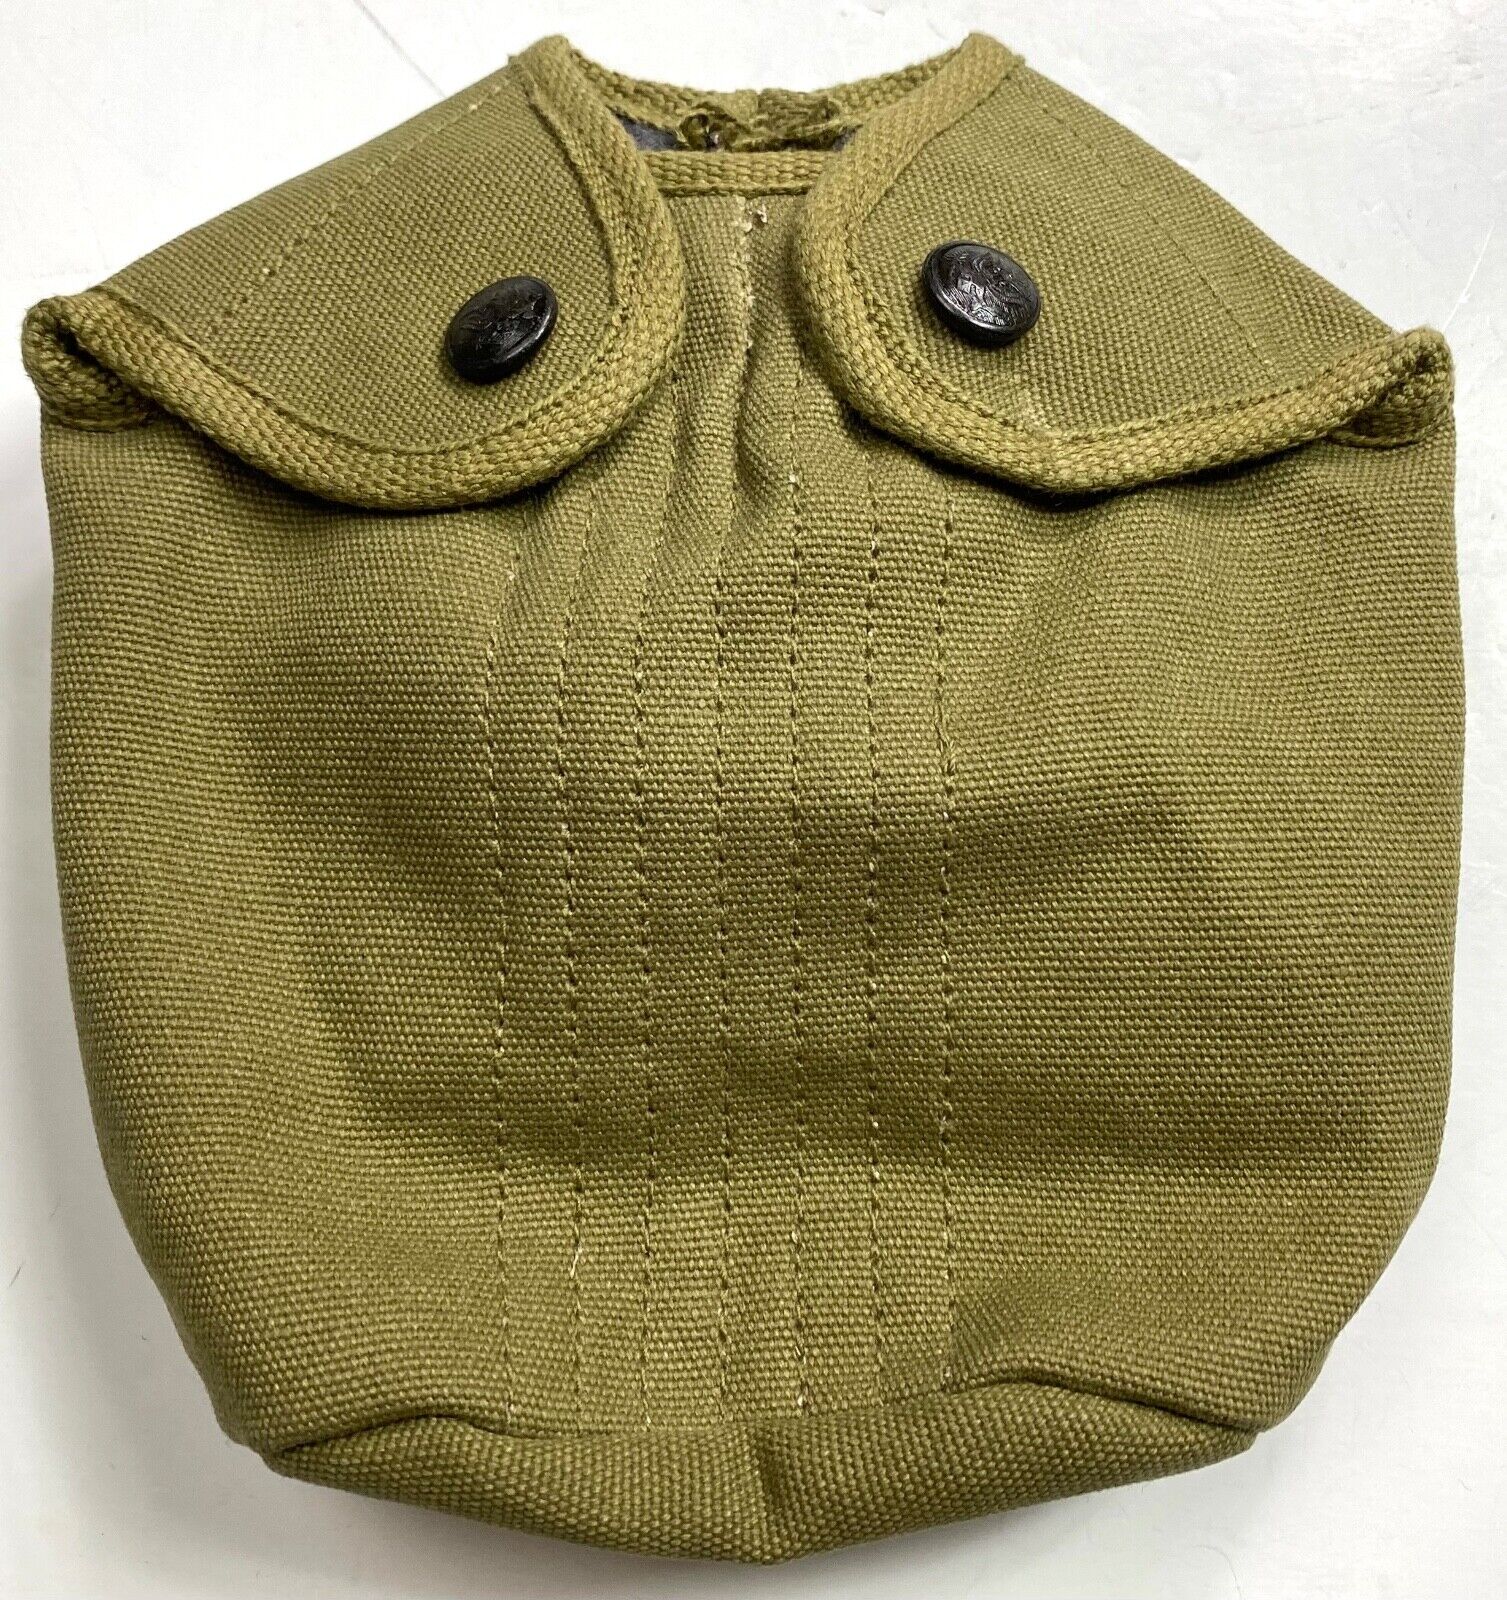  WWI US M1910 EAGLE SNAP CANTEEN COVER-PEA GREEN